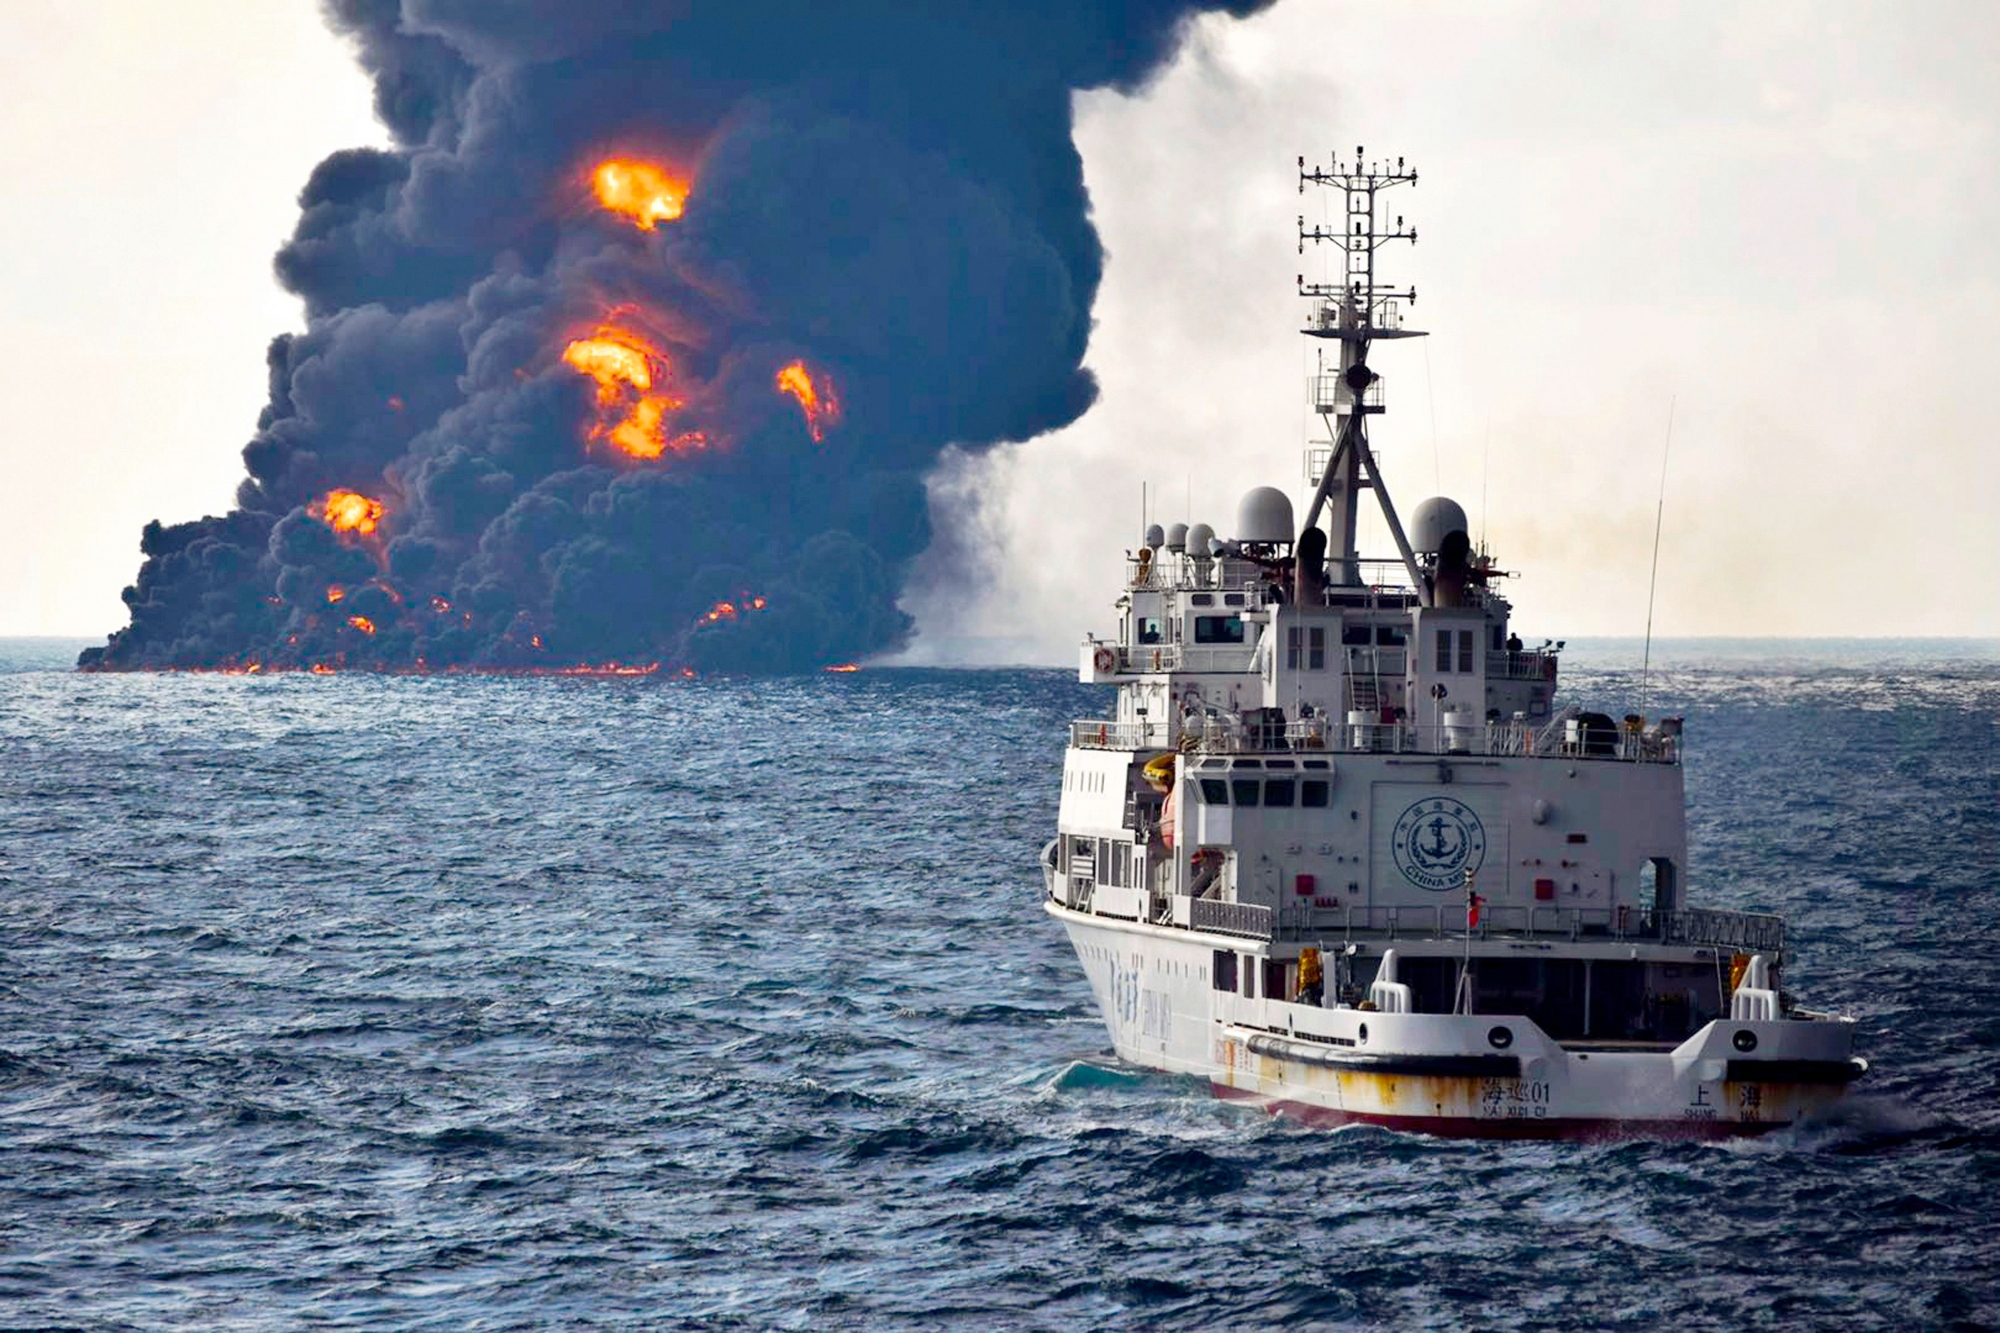 In this Sunday, Jan. 14, 2018, photo provided by China's Ministry of Transport, a rescue ship sails near the burning Iranian oil tanker Sanchi in the East China Sea off the eastern coast of China. The fire from the sunken Iranian tanker ship in the East China Sea has burned out, a Chinese transport ministry spokesman said Monday, although concerns remain about possible major pollution to the sea bed and surrounding waters. (Ministry of Transport via AP) China Sea Collision